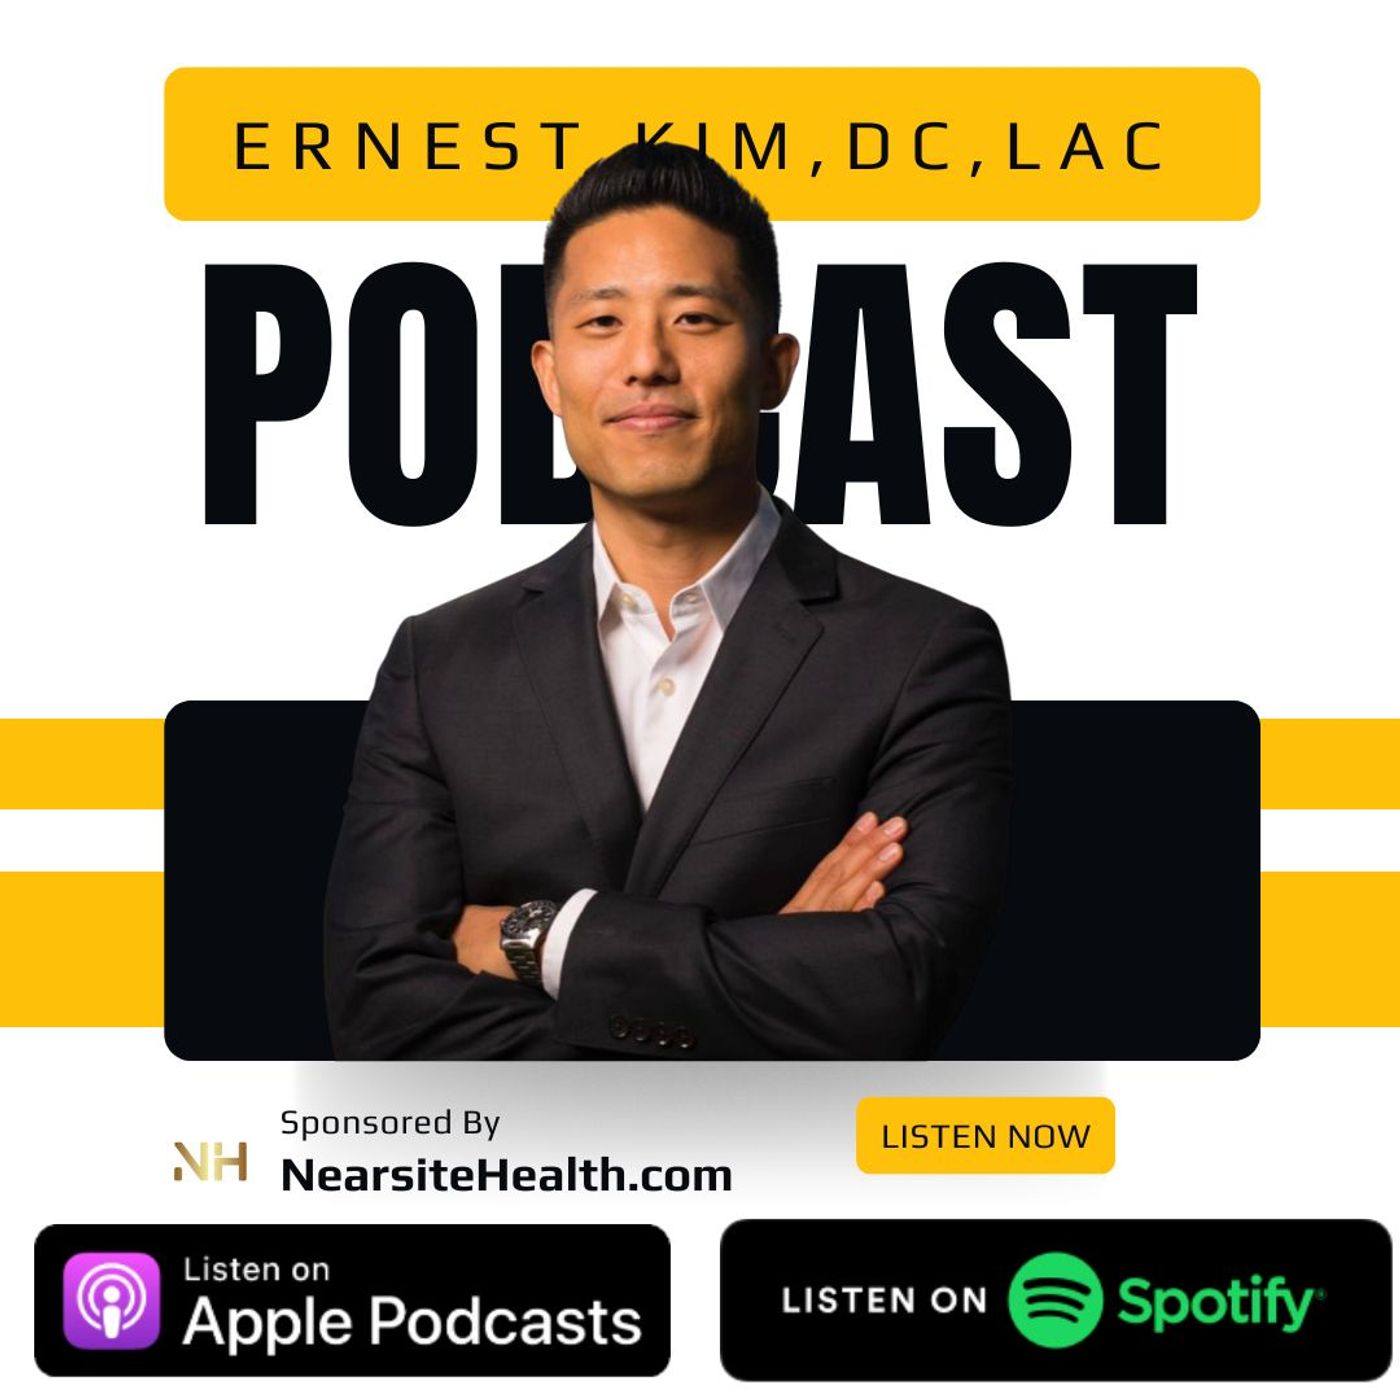 NBA, Finding Your Creative Talent, Aligning Fitness and Wellness - Dr. Ernest Kim Image